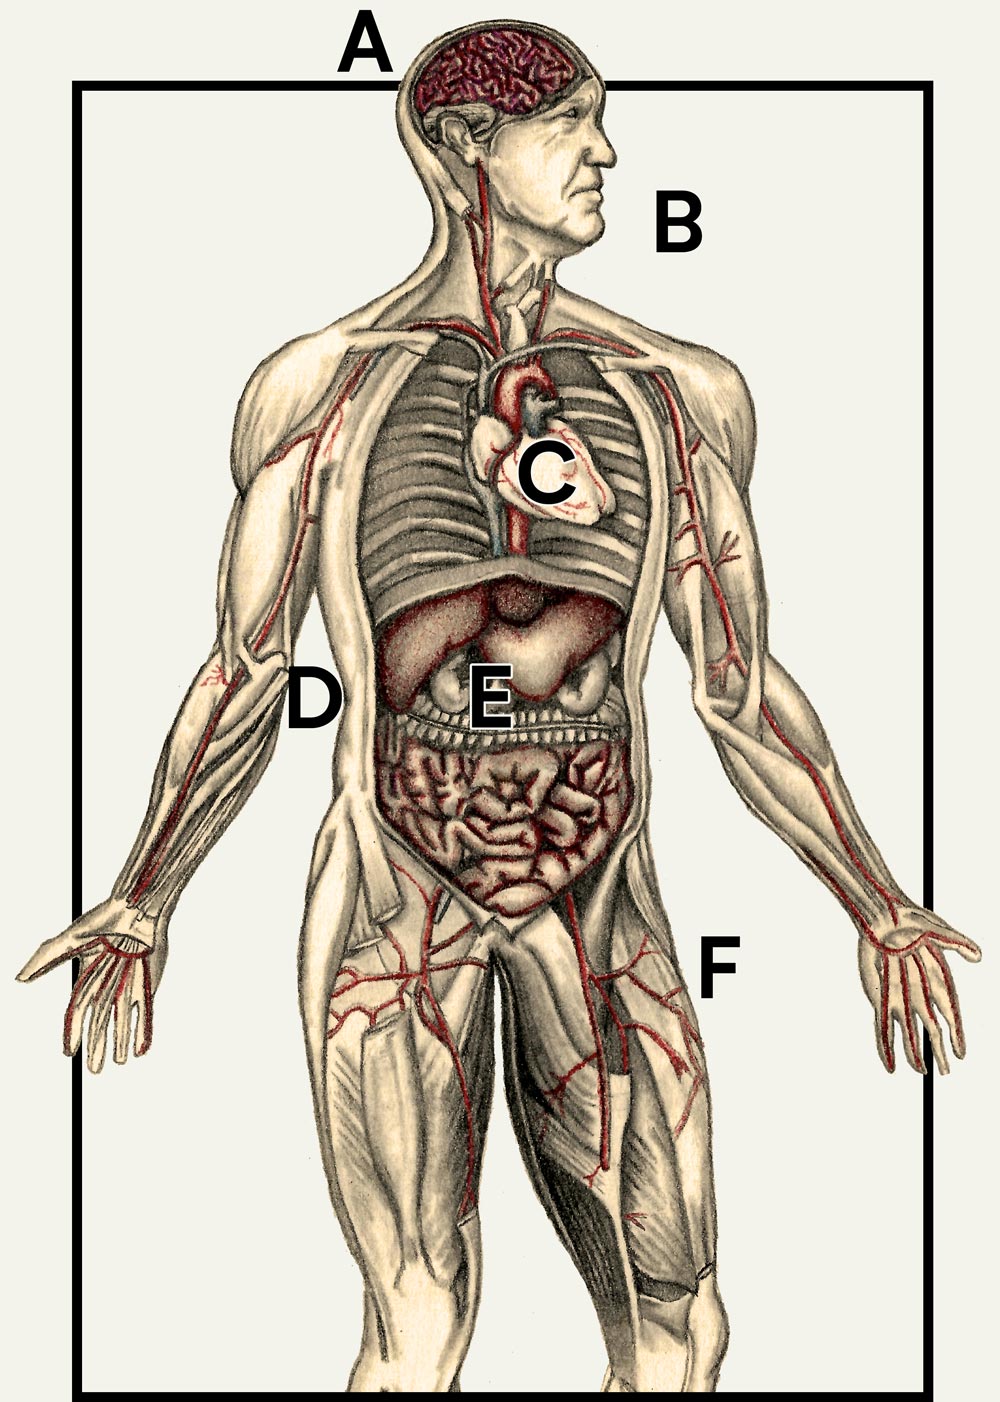 A diagram showing various parts of a human body, including the brain, heart, stomach, muscles, and blood vessels.